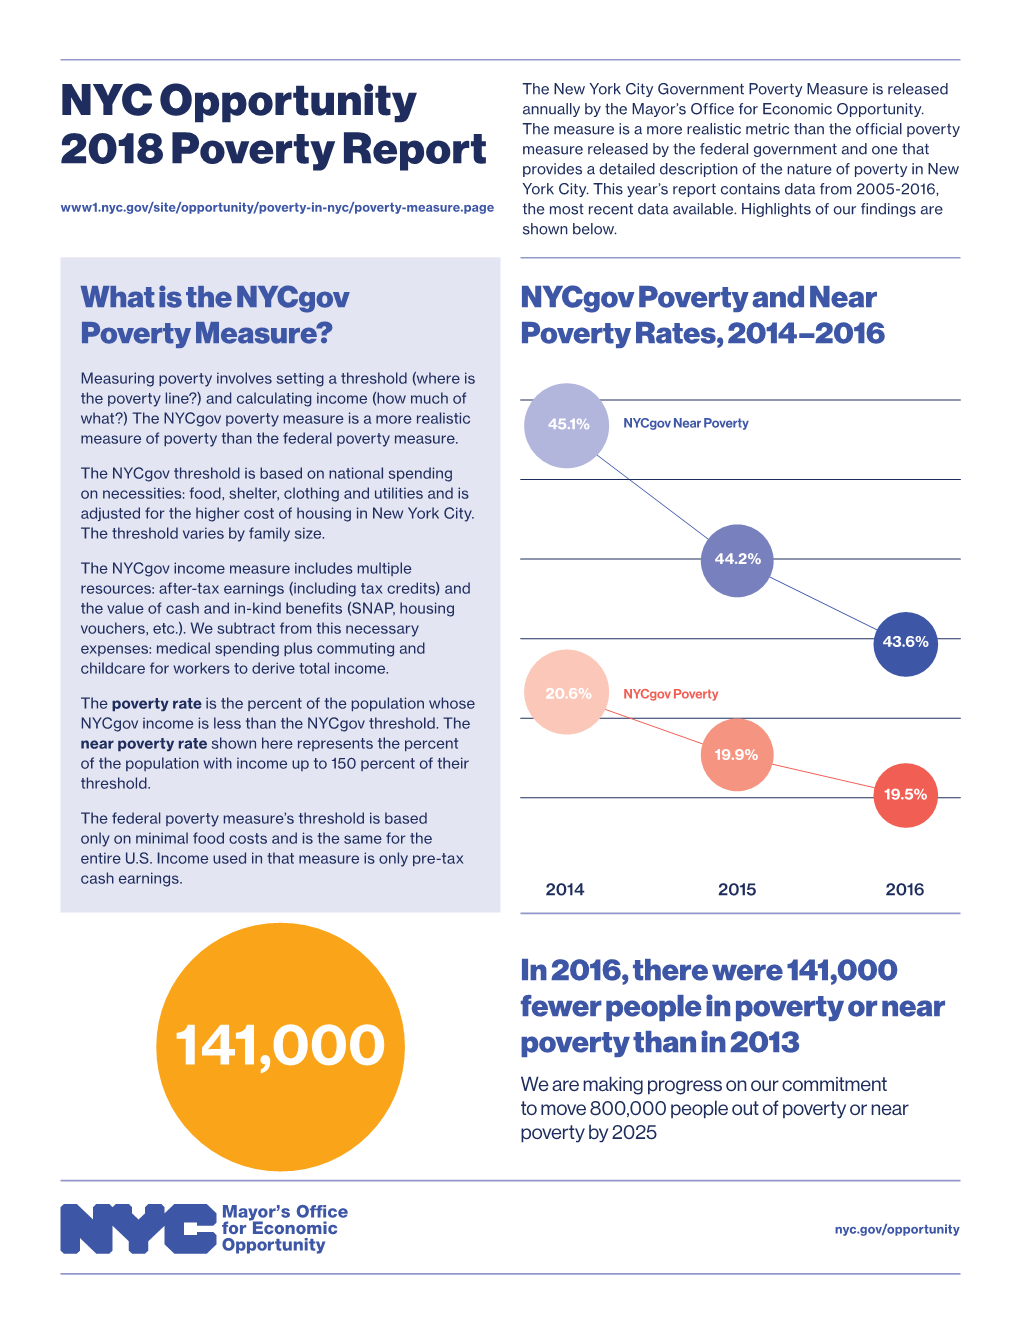 NYC Opportunity 2018 Poverty Report